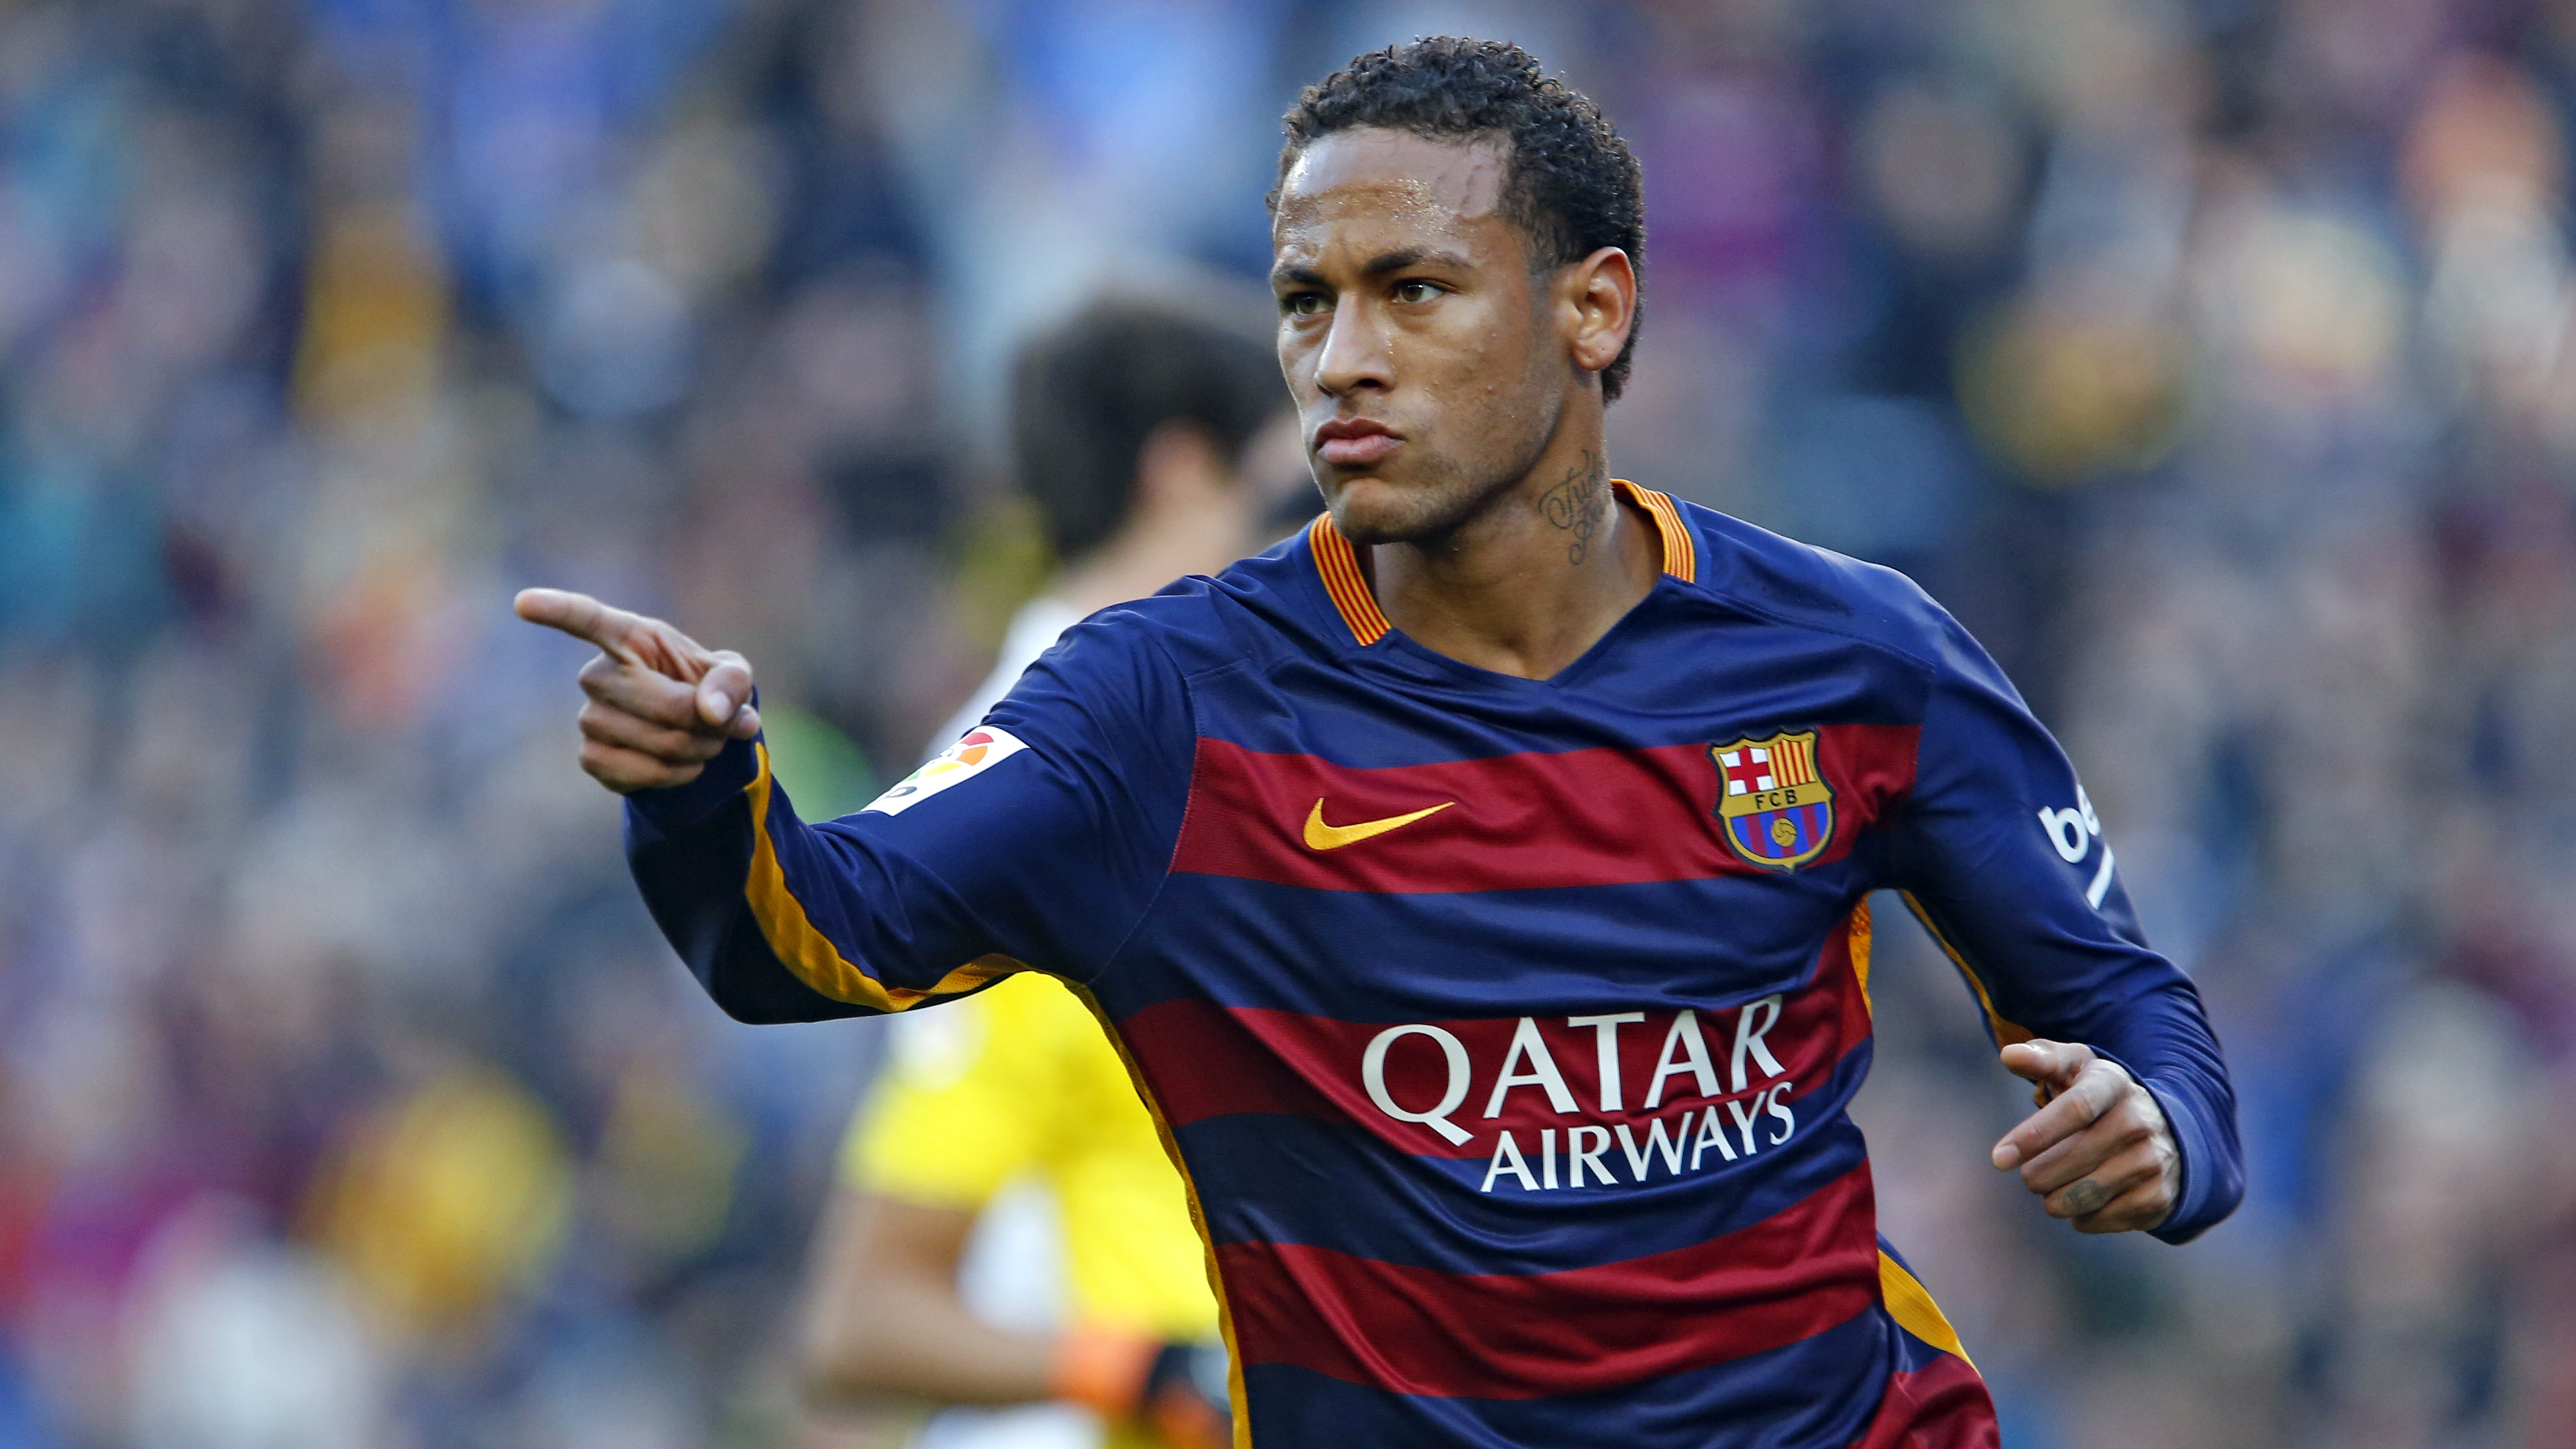 Neymar extends lead in the race for the Pichichi Trophy